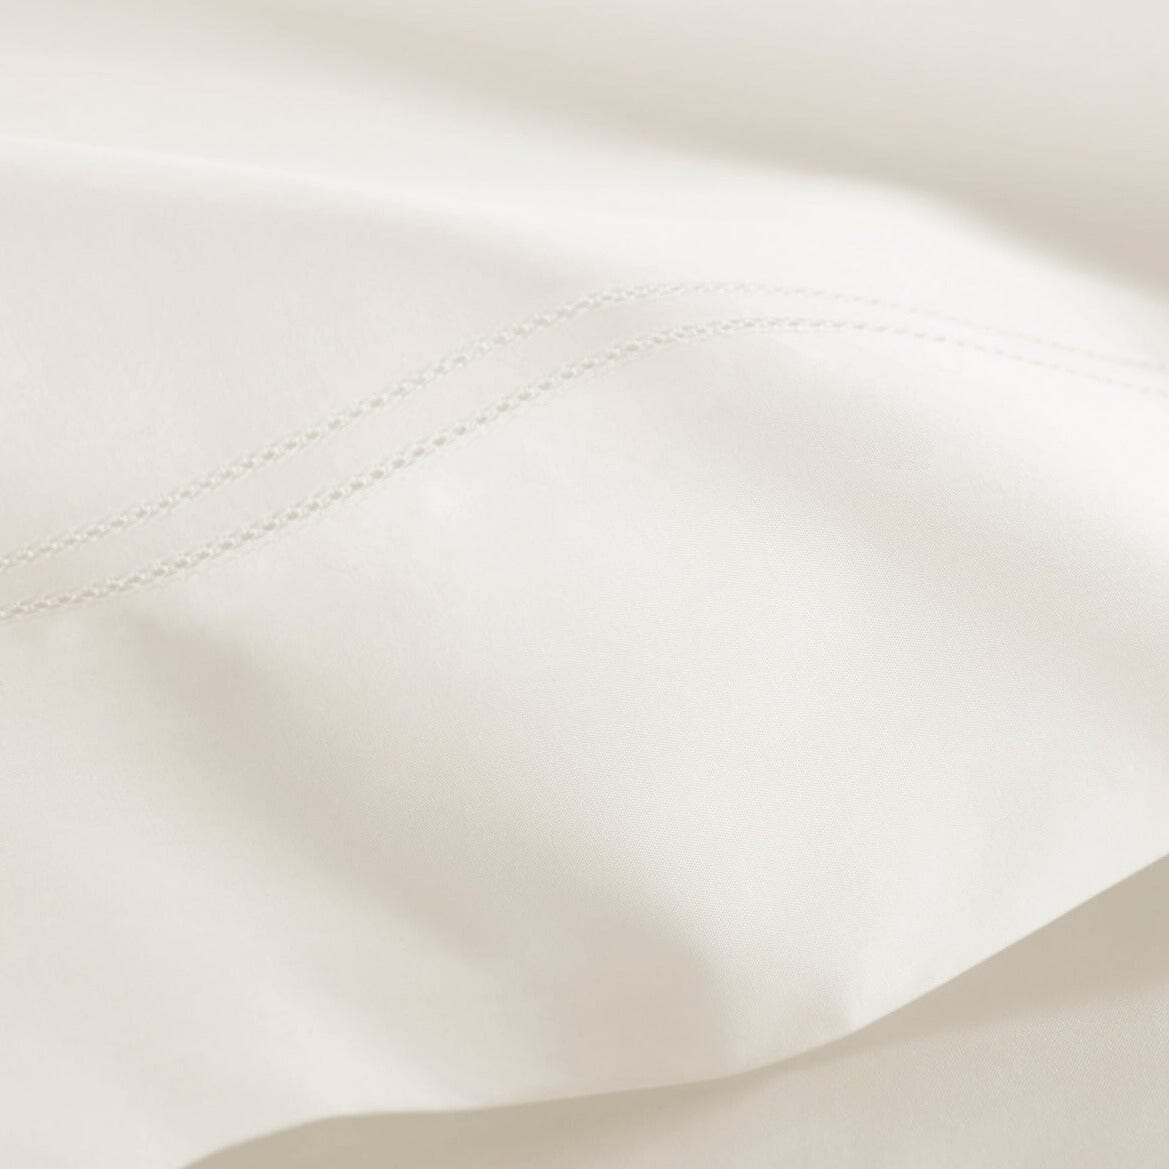 Flat Sheet Double Hemstitch Detail - Peacock Alley Percale Cotton Bedding | Lyric Ivory at Fig Linens and Home